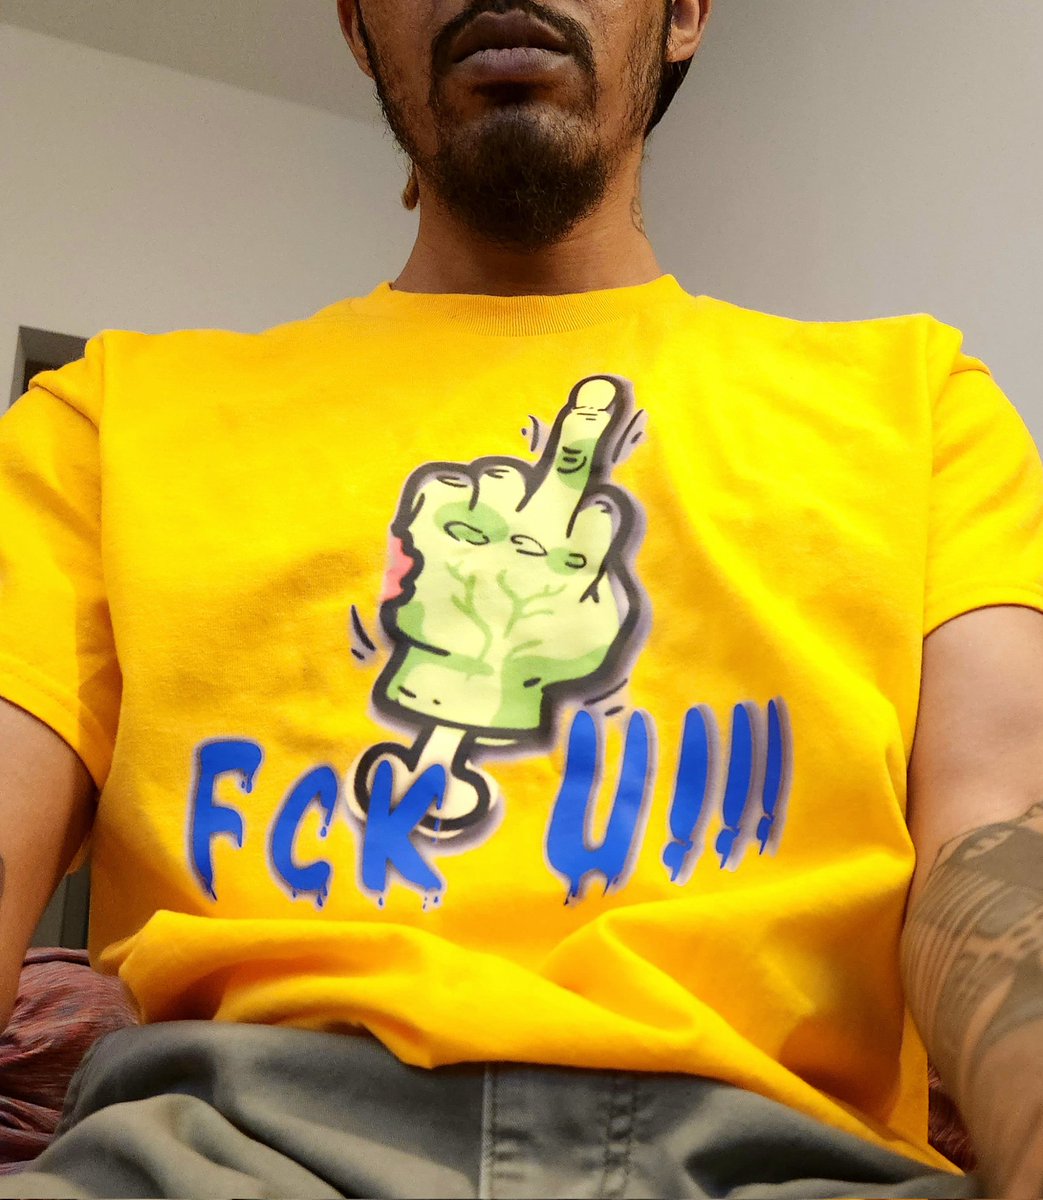 ‼️NEW SHIRT ALERT‼️

'Zombie Finger' t-shirt

White, Black, Yellow, Green, Purple, and Navy

S-4XL

DM TO ORDER YOURS!!!!!!

#BlackOwnedBusiness #BuyBlack #DisabledDad #TshirtDesign #GraphicTshirt #GraphicTee #Zombies #MiddleFinger #FckU #FckYou